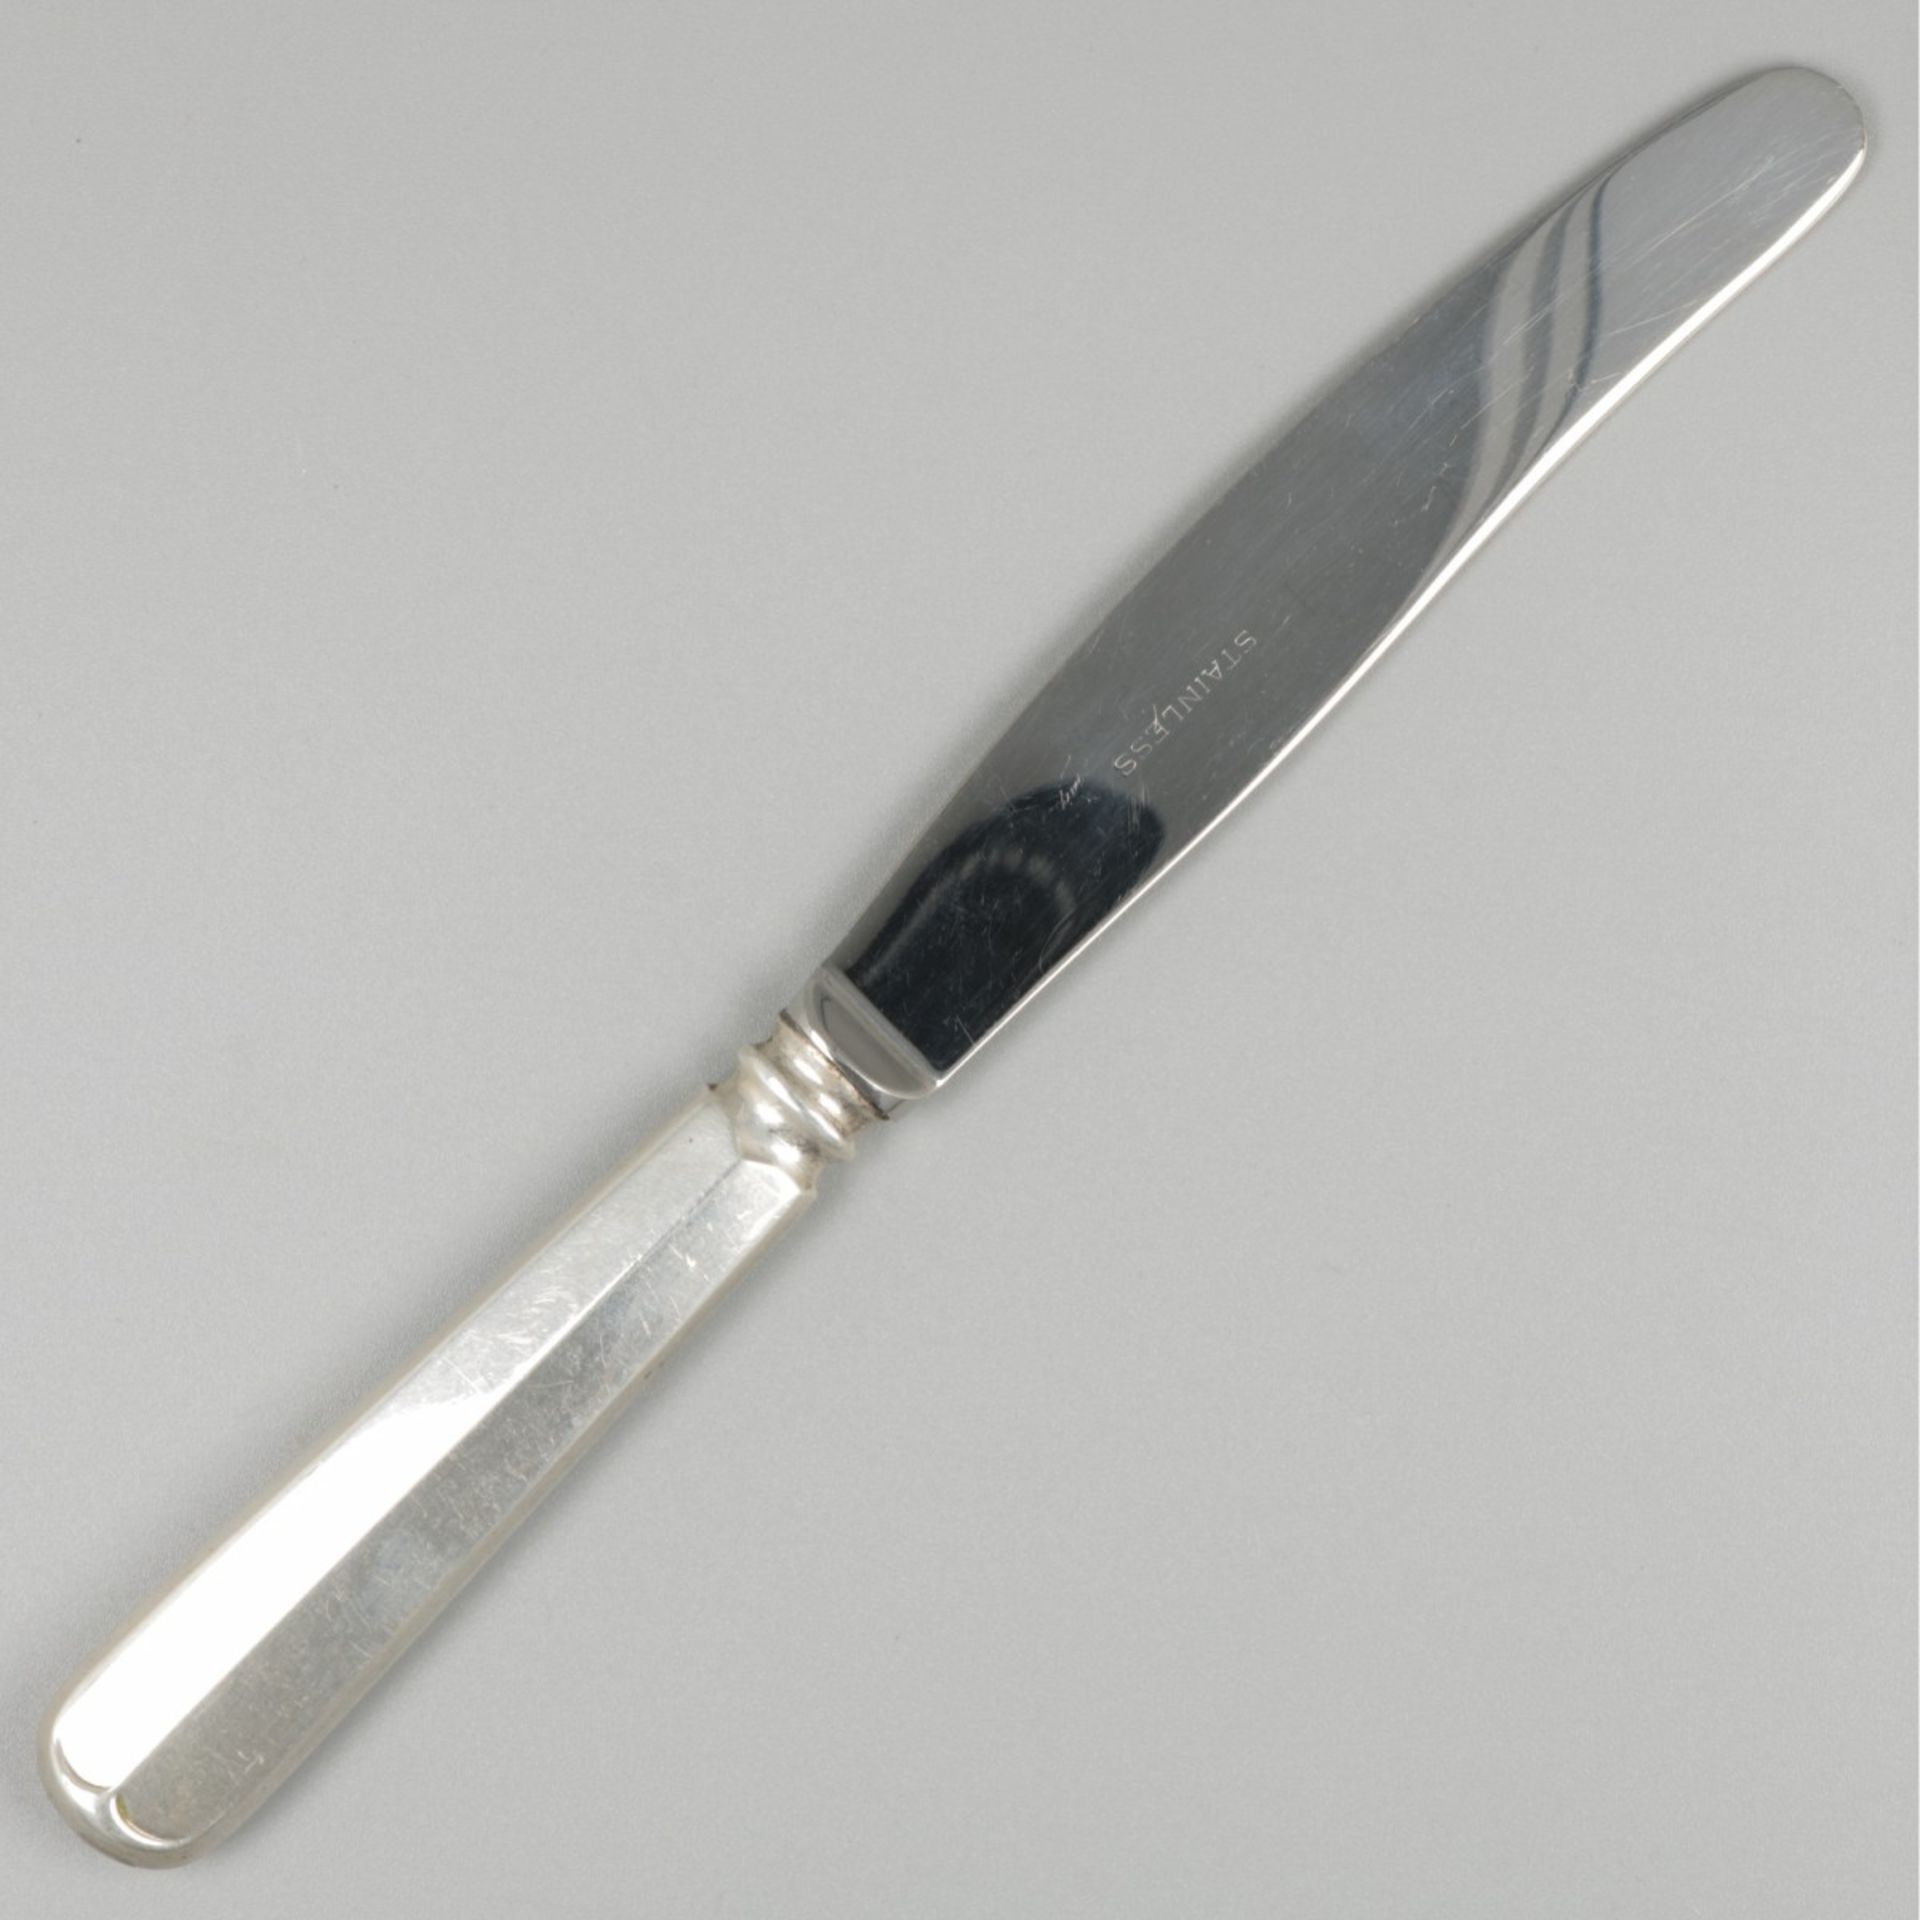 8-piece set of knives "Haags Lofje" silver. - Image 3 of 6